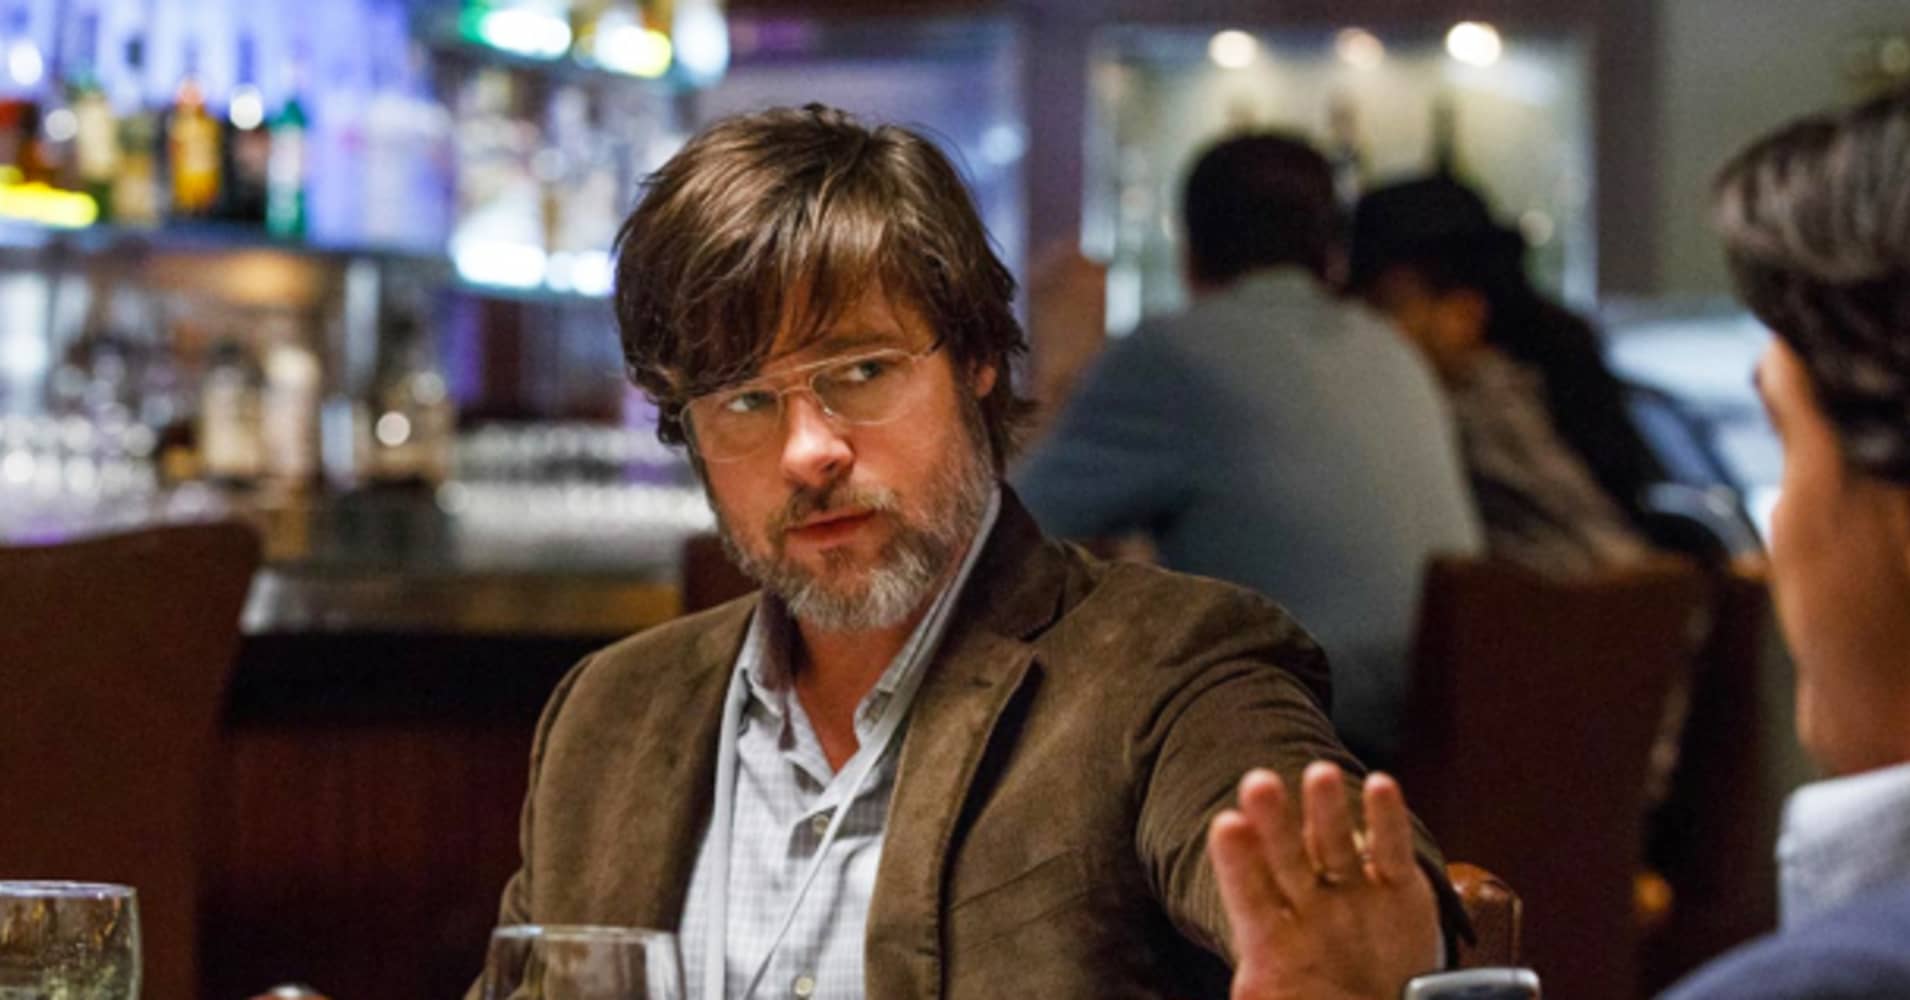 The Big Short' is actually pretty funny—commentary